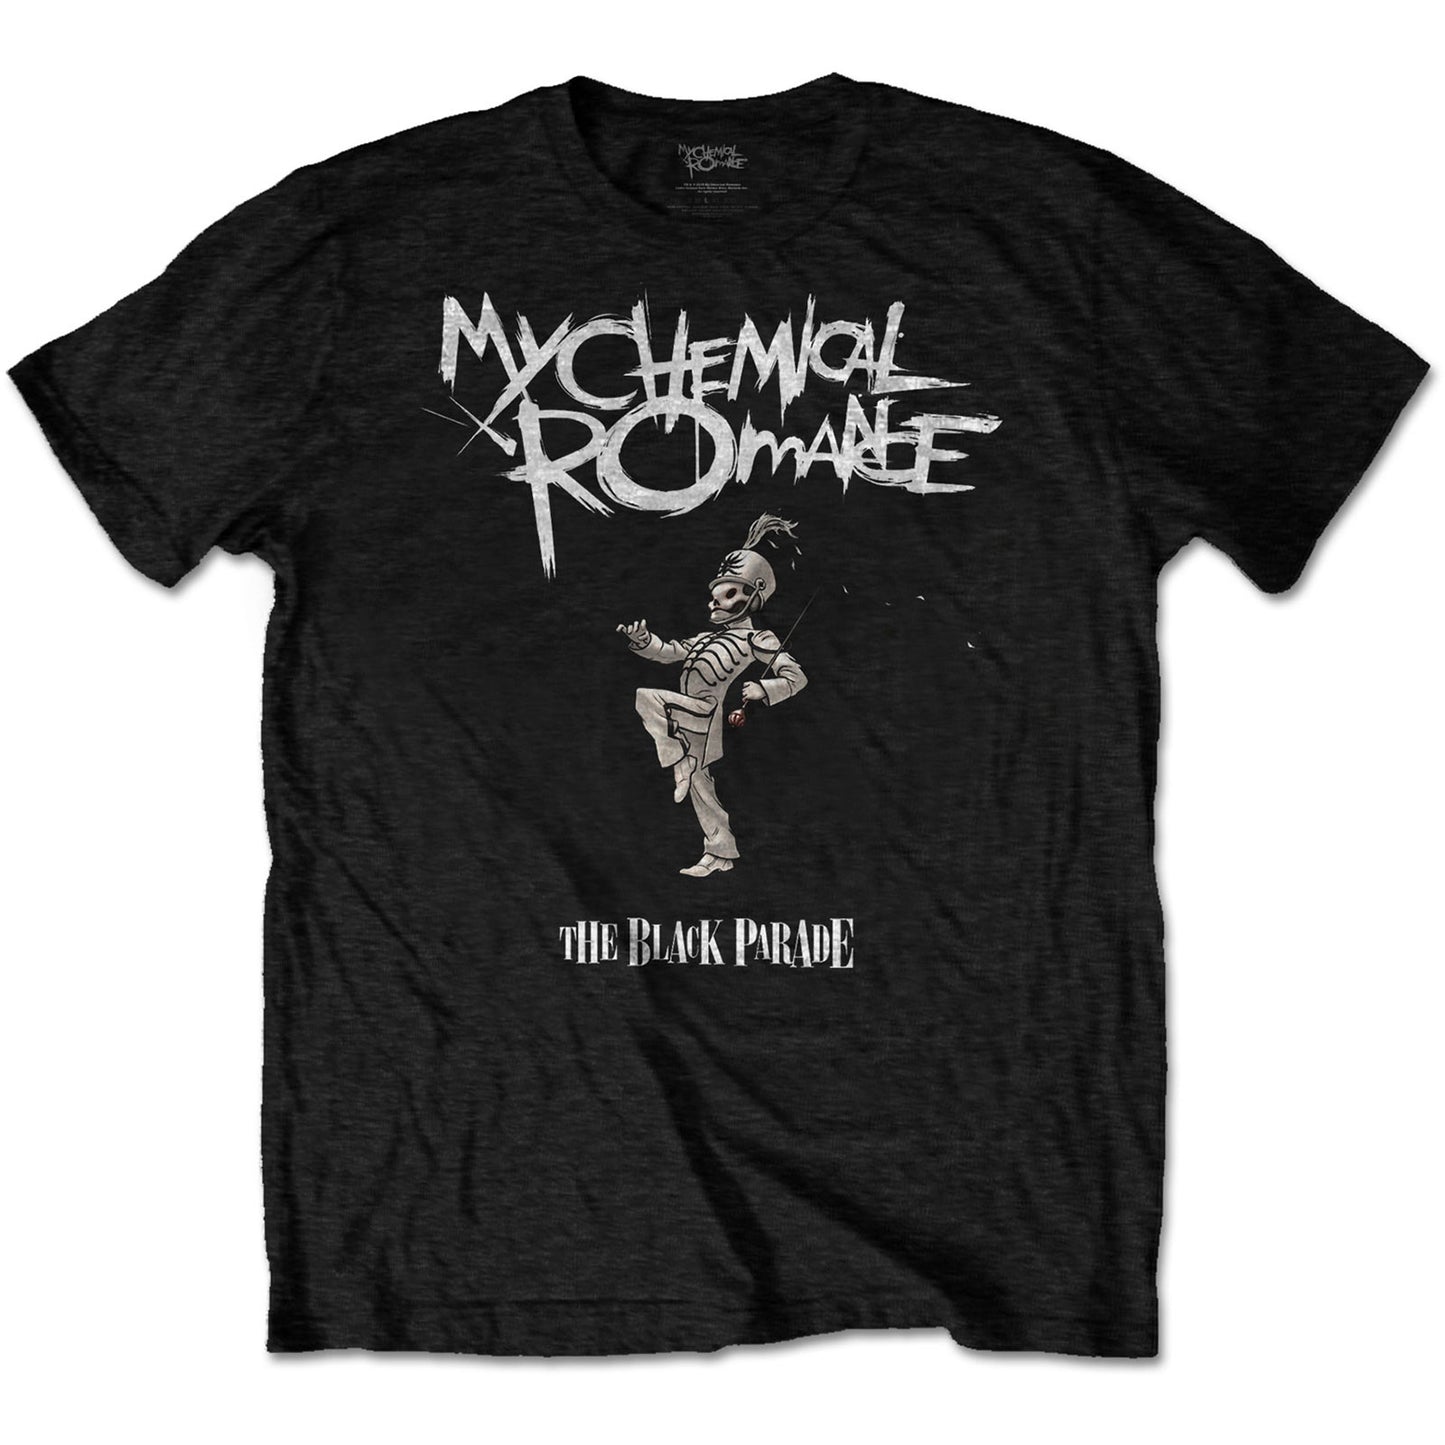 My Chemical Romance T-Shirt: The Black Parade Cover